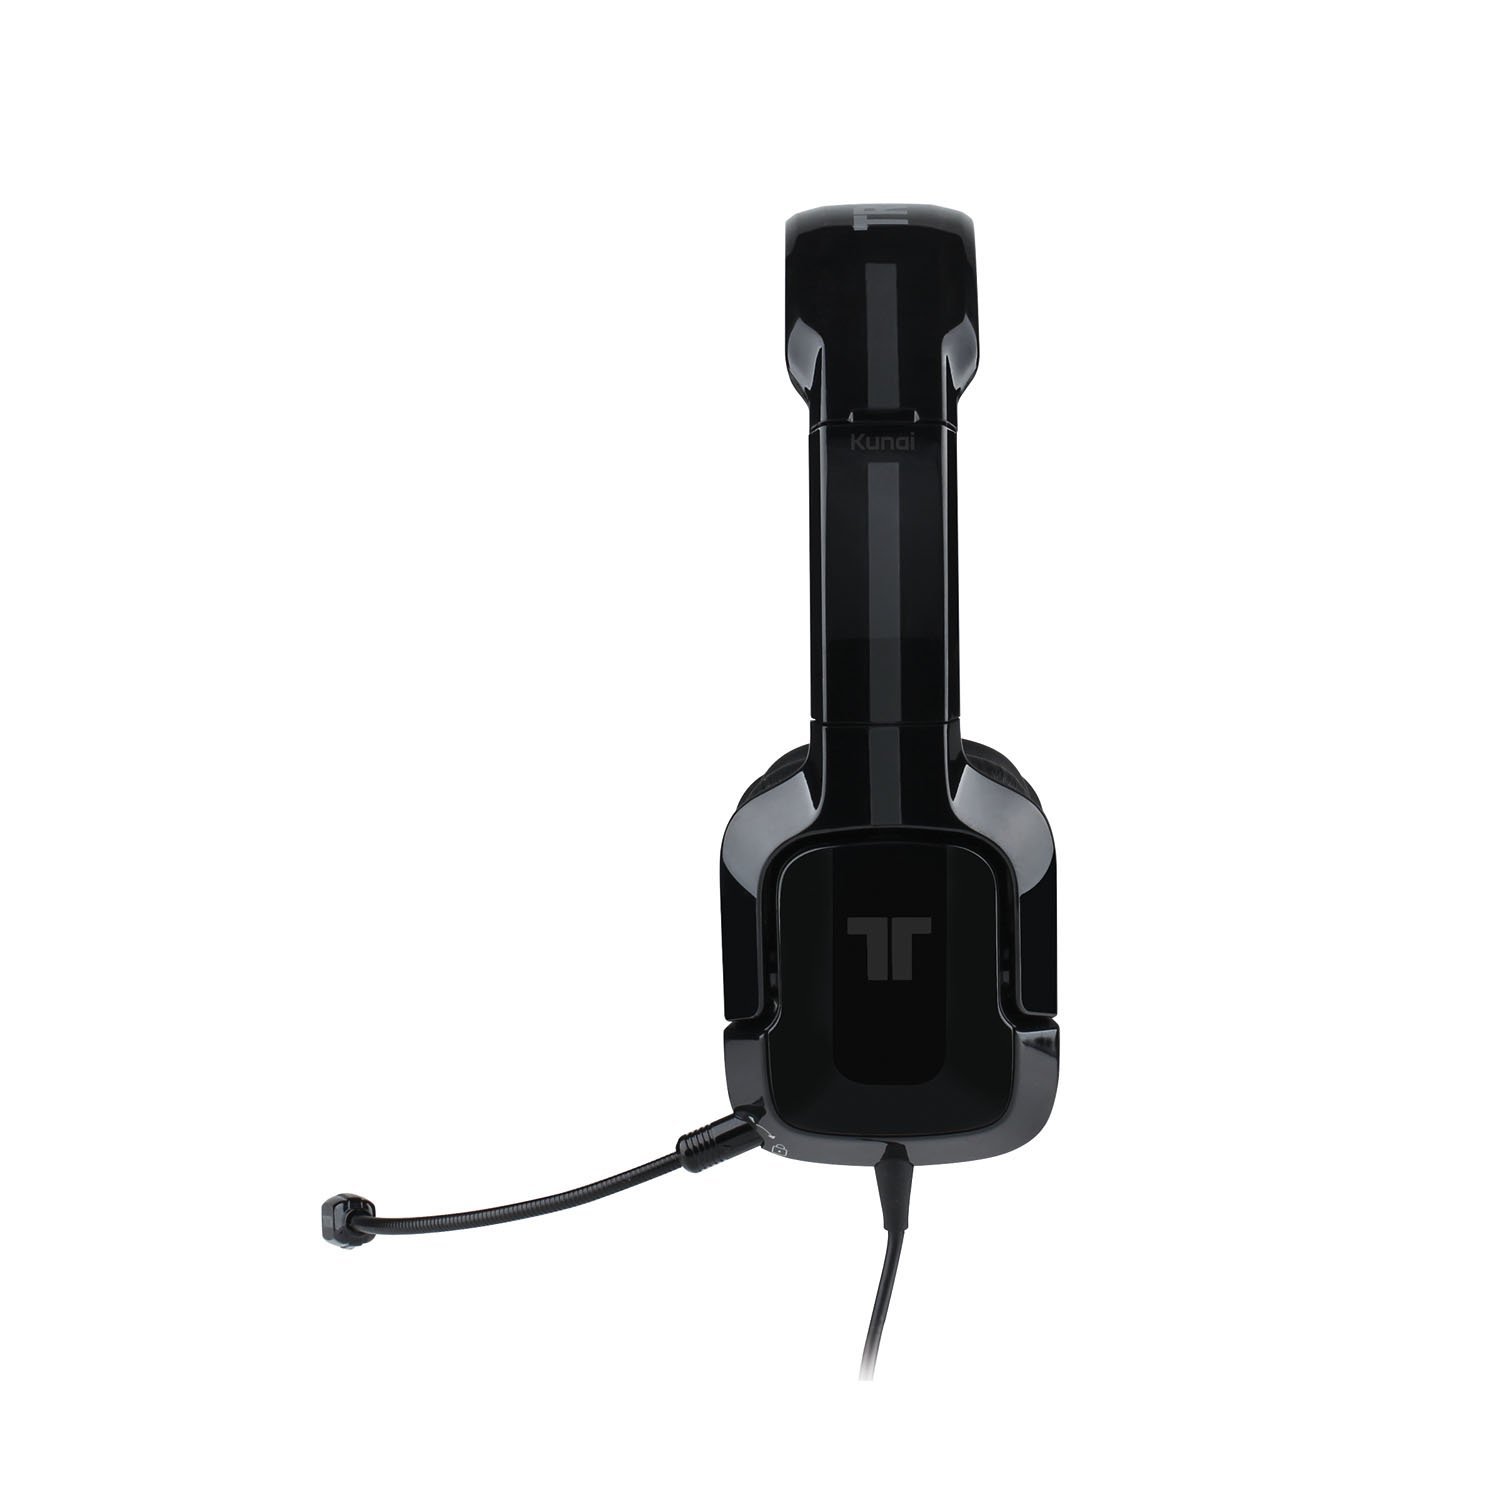 TRITTON Kunai Stereo Headset for Xbox One and Mobile Devices